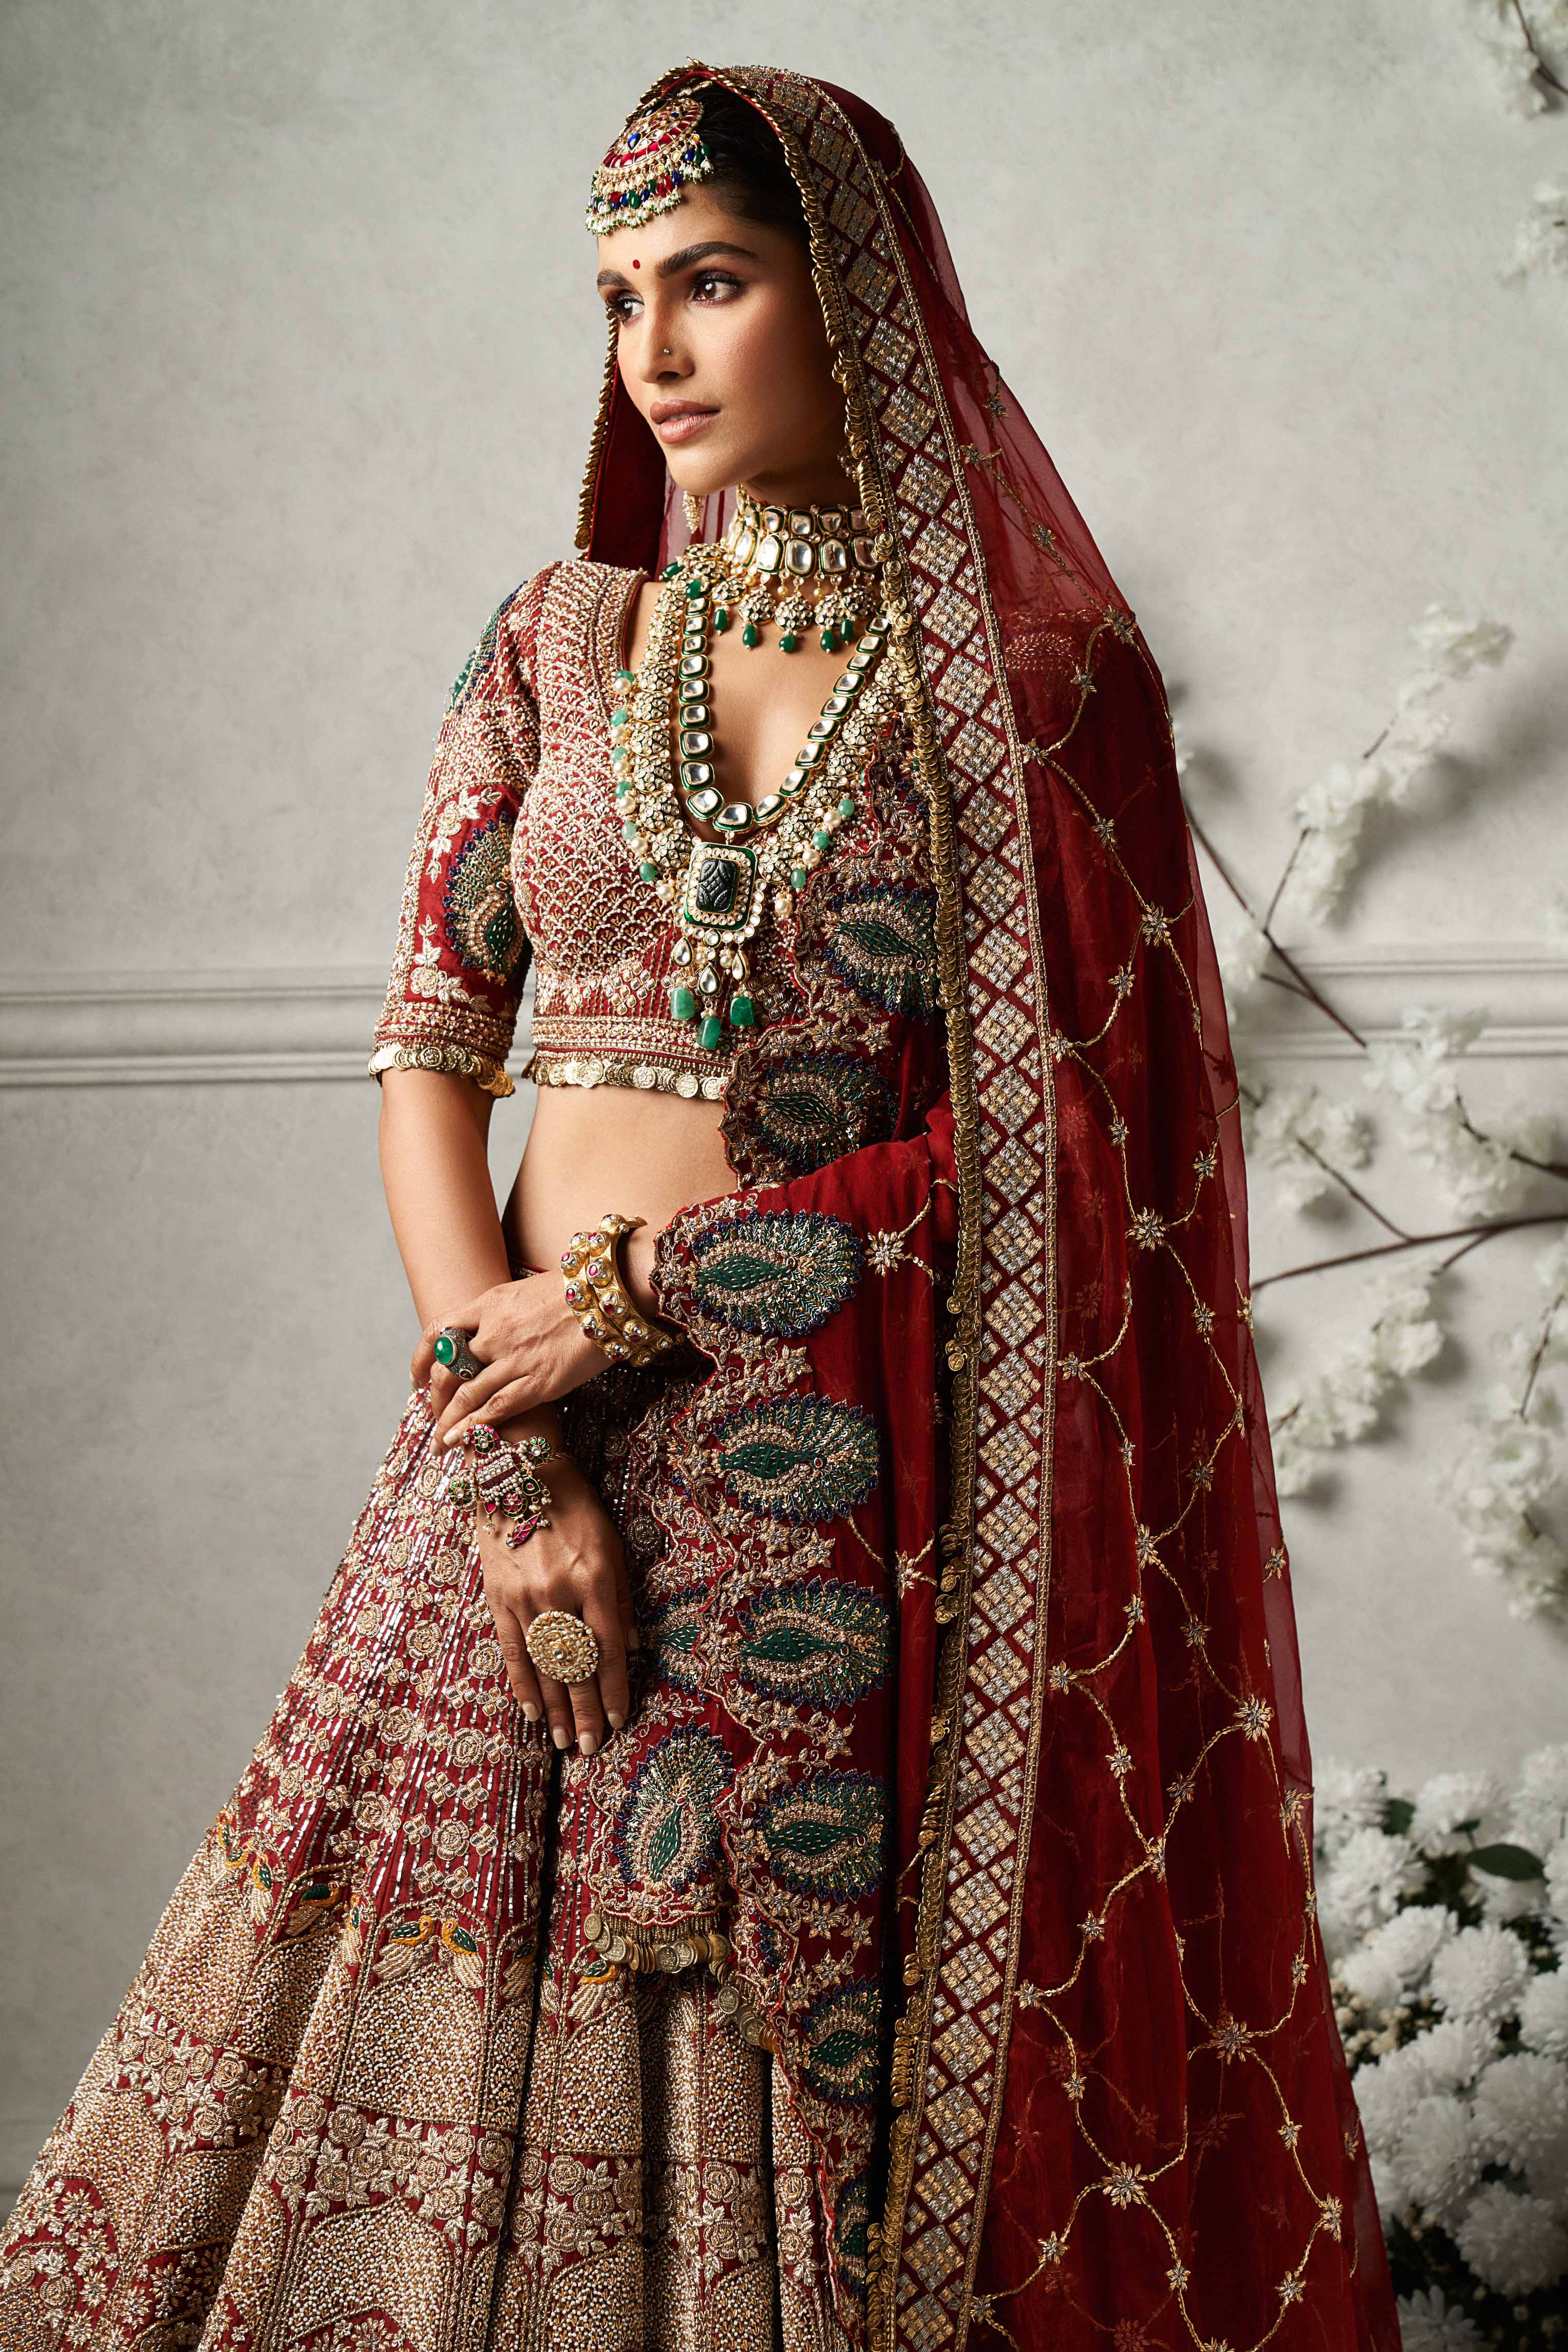 Deep Maroon Bridal Lehenga With Hand Emroidered Peacock Motifs And Two Dupattas